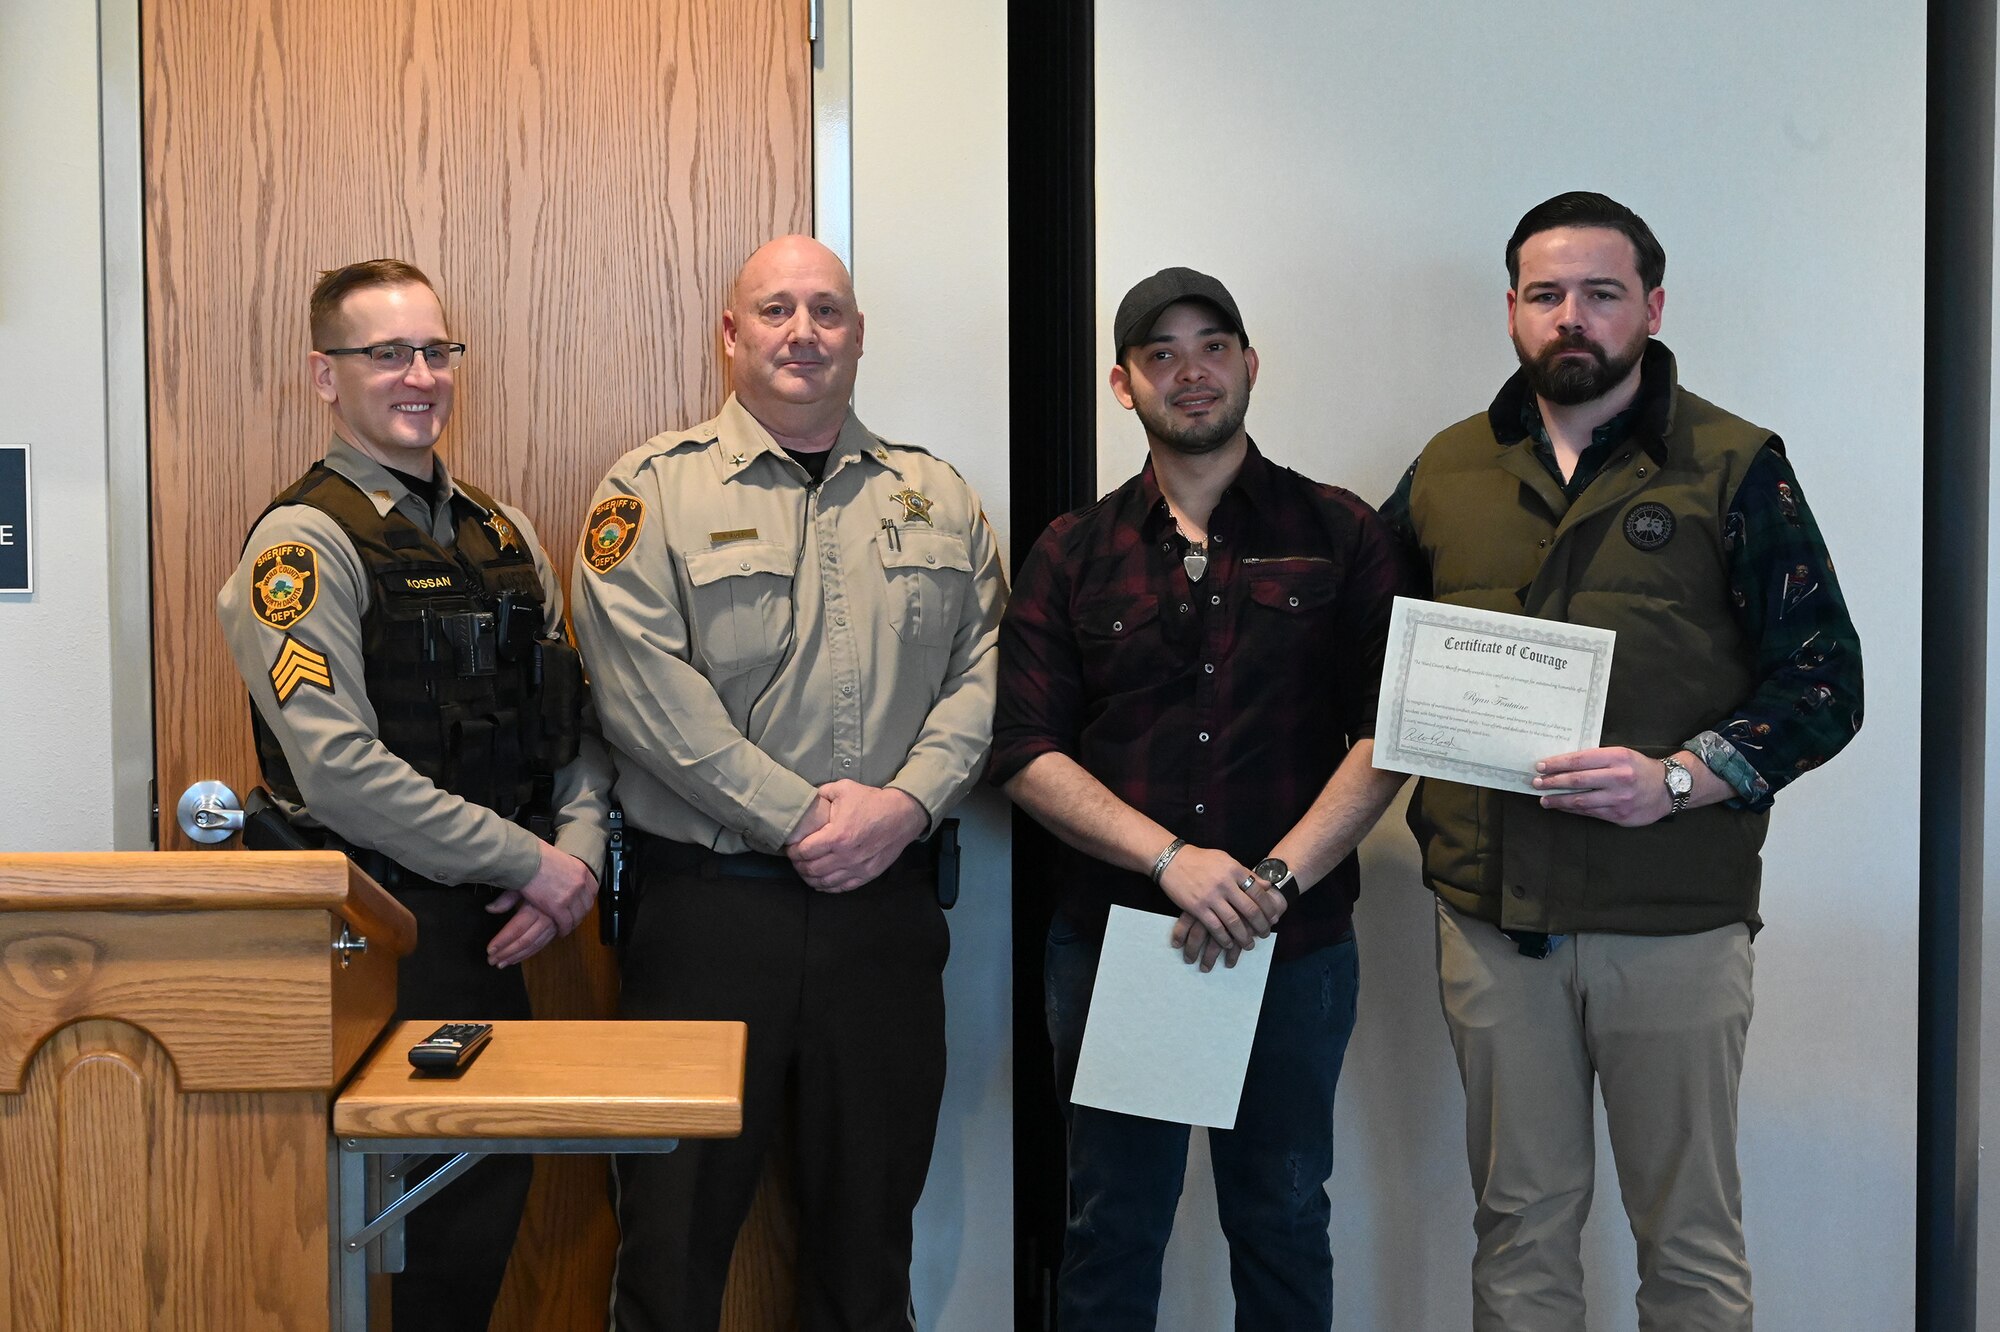 Photo of Tech Sgt. Ryan Fontaine being recognized by Ward County, N.D. Sheriff.